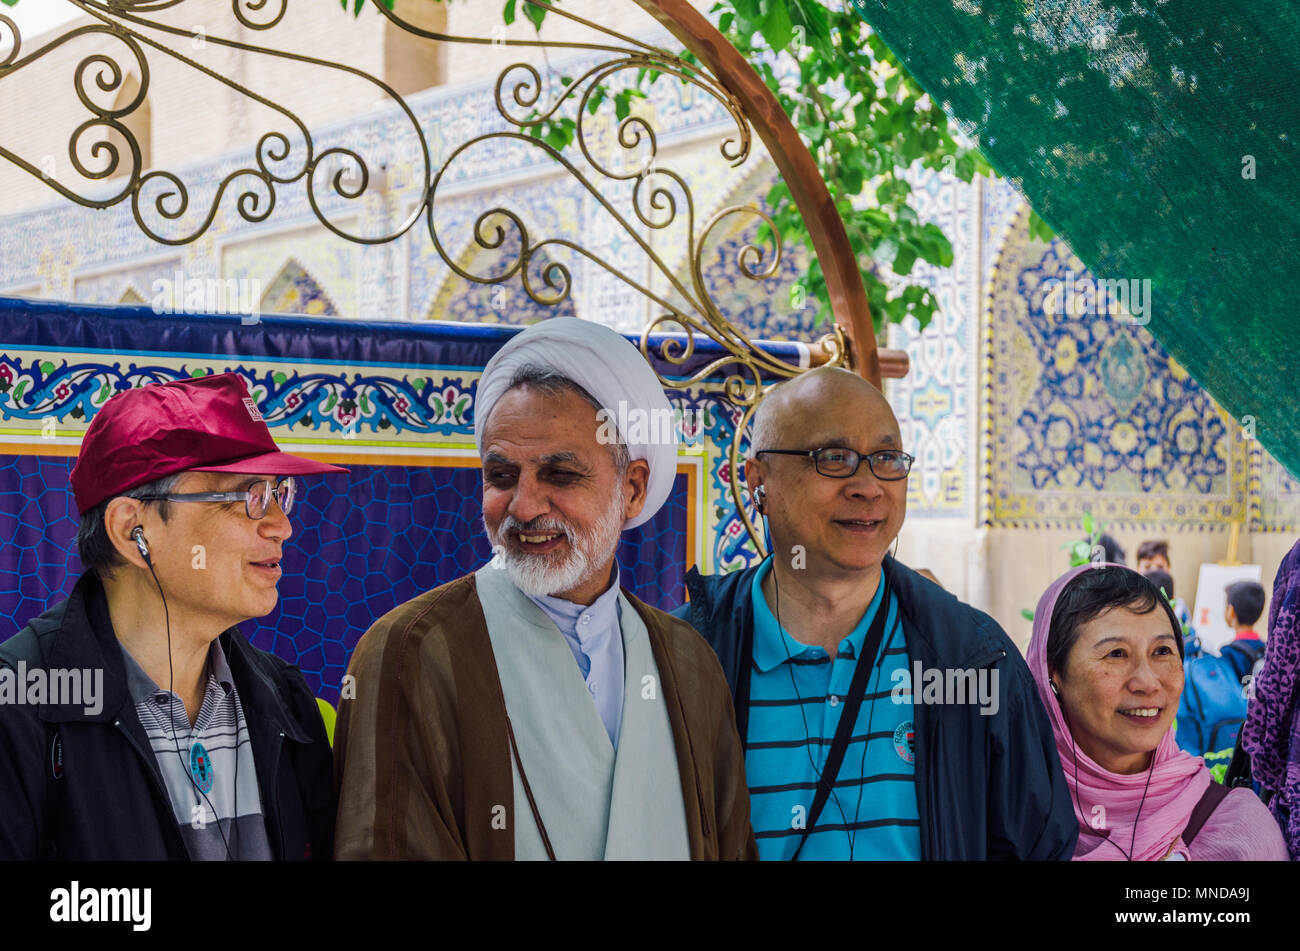 Isfahan, Iran - April 23, 2018: An older Iranian Mullah wearing a keffiyeh poses with tourists in the courtyard of the Jame Mosque Stock Photo